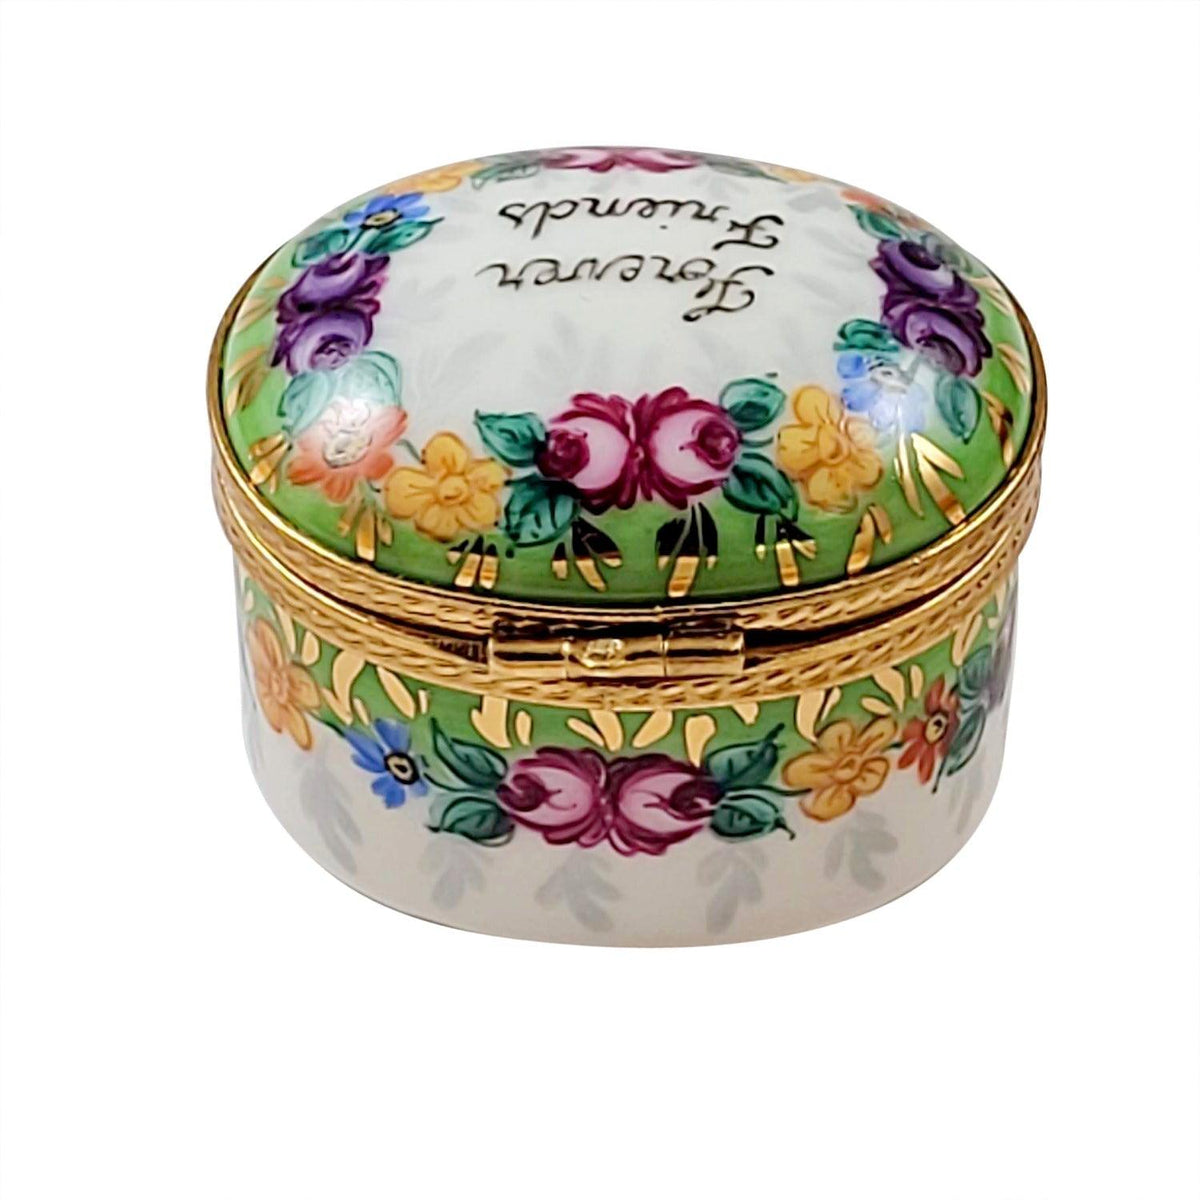 Forever Friends with Flowers Limoges Box - Limoges Box Boutique